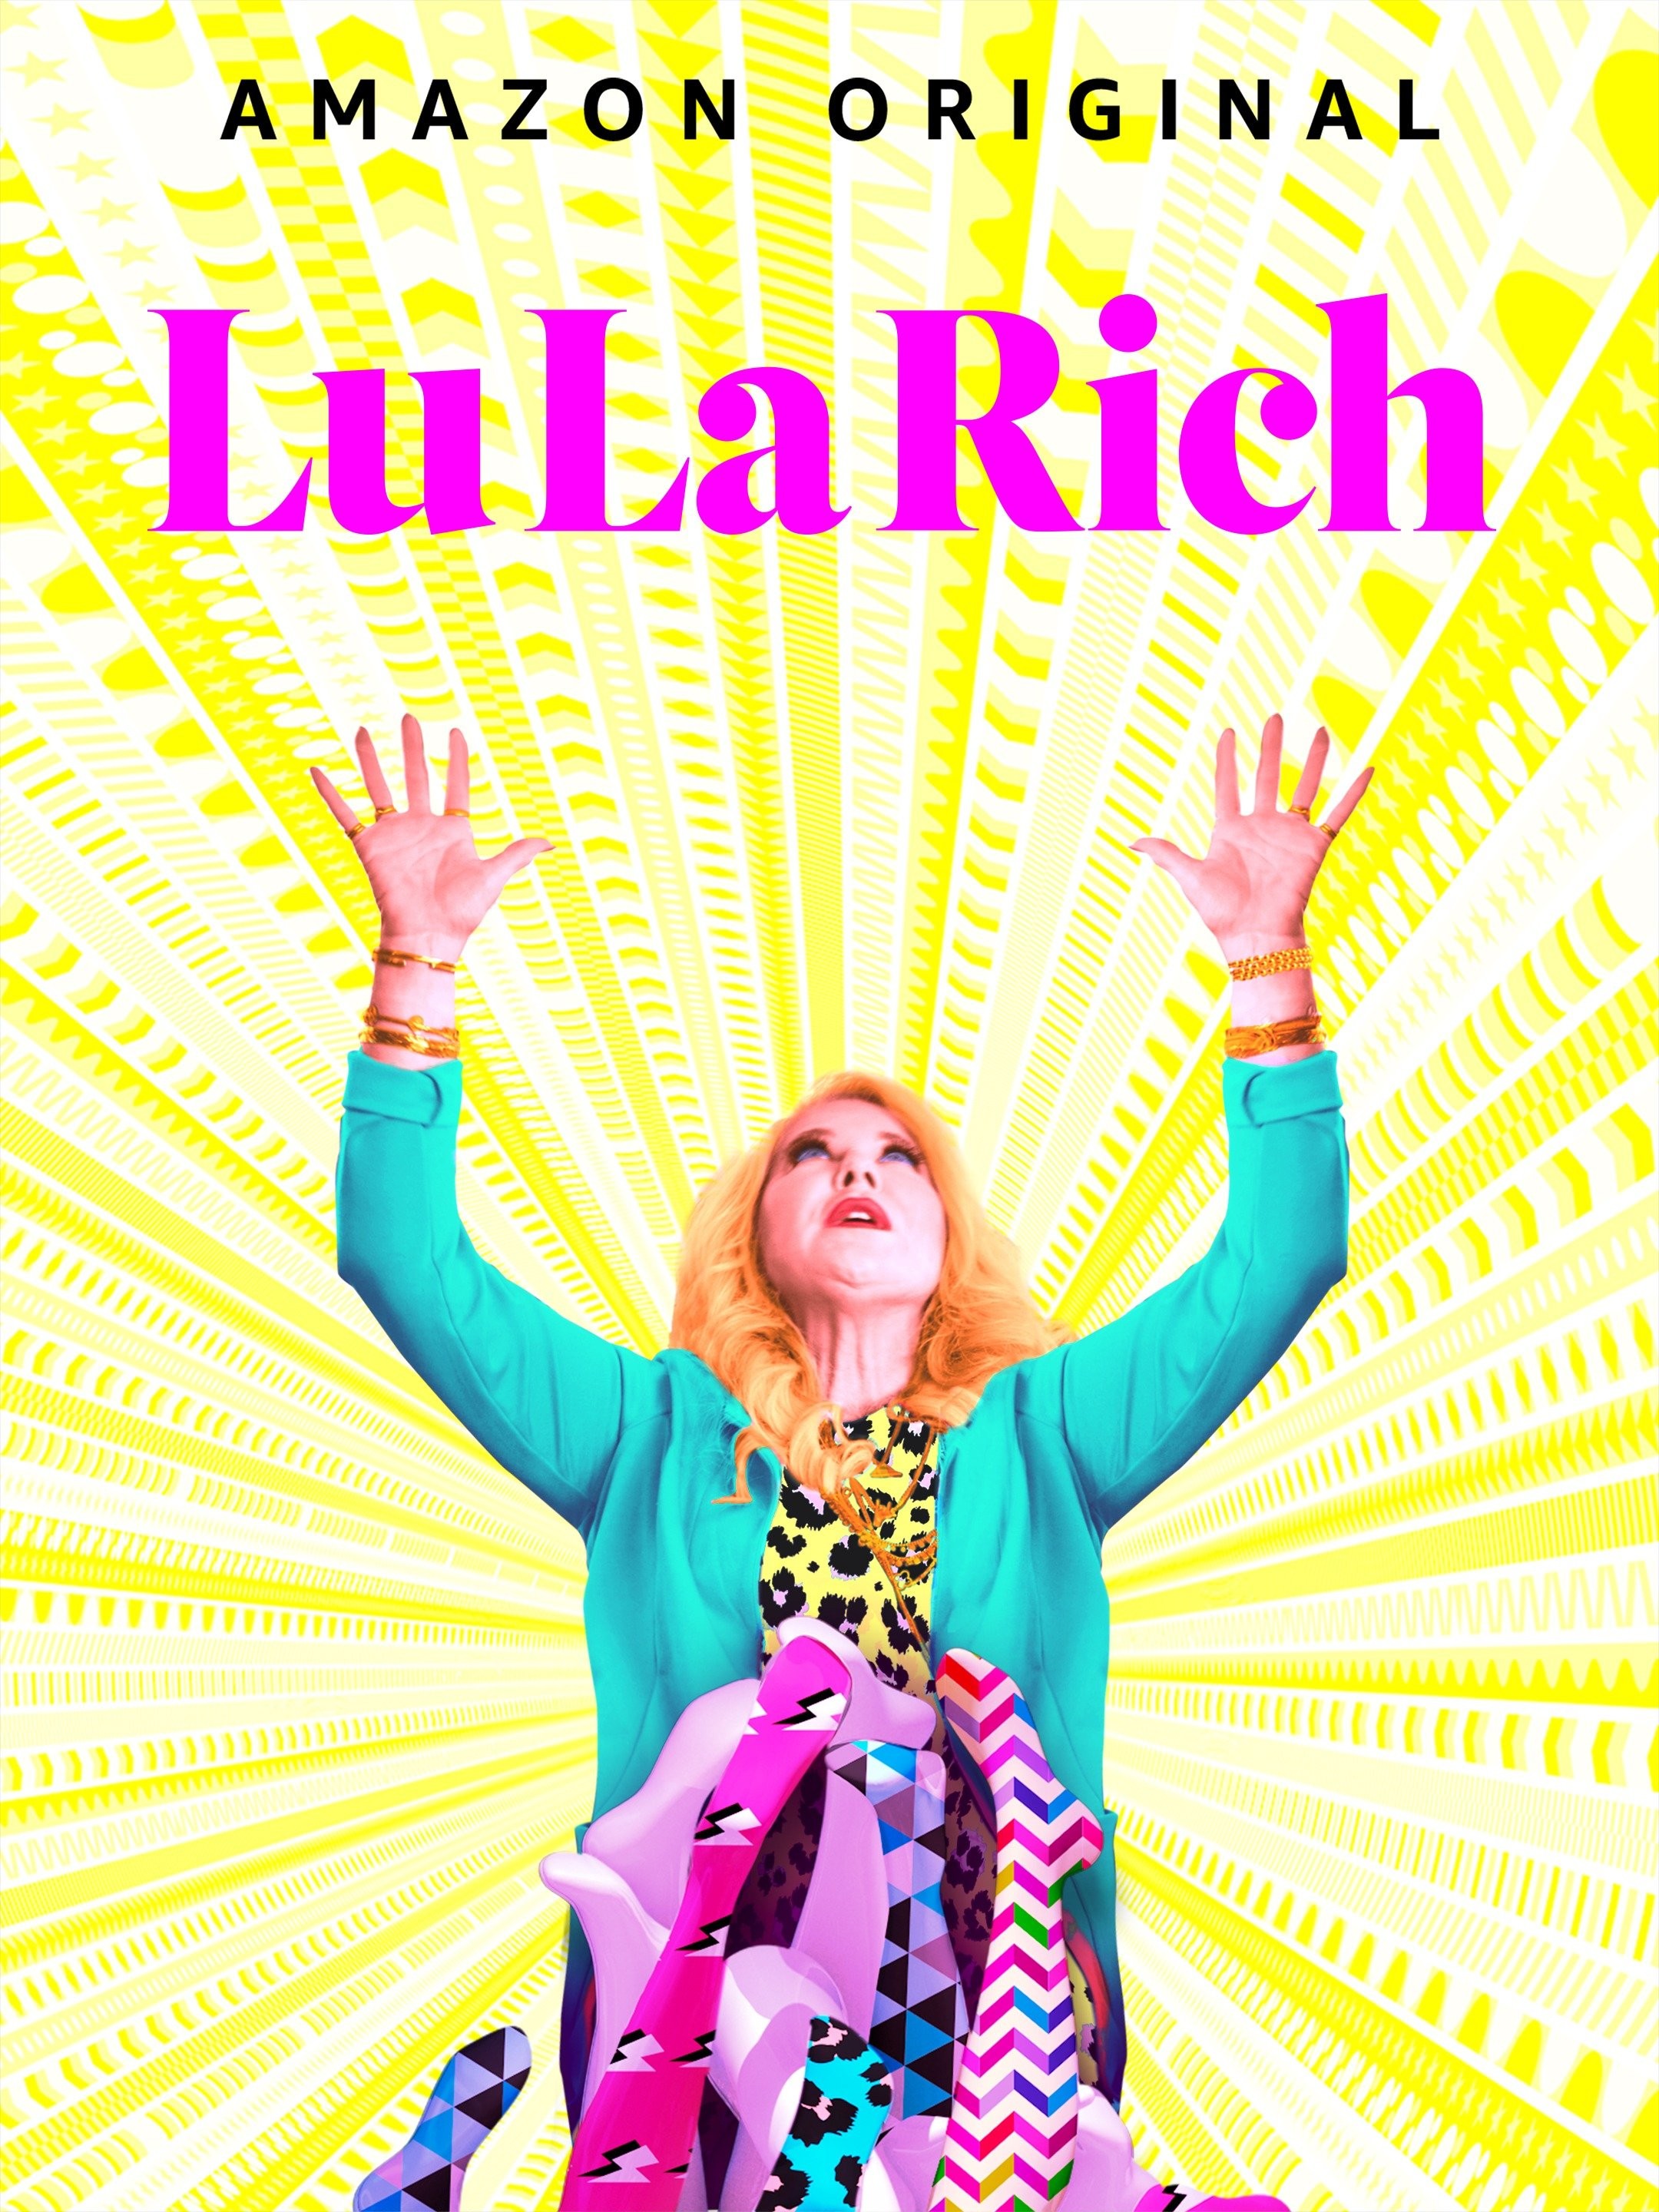 LuLaRich' and pyramid schemes: 4 ways to tell if the company is a scam